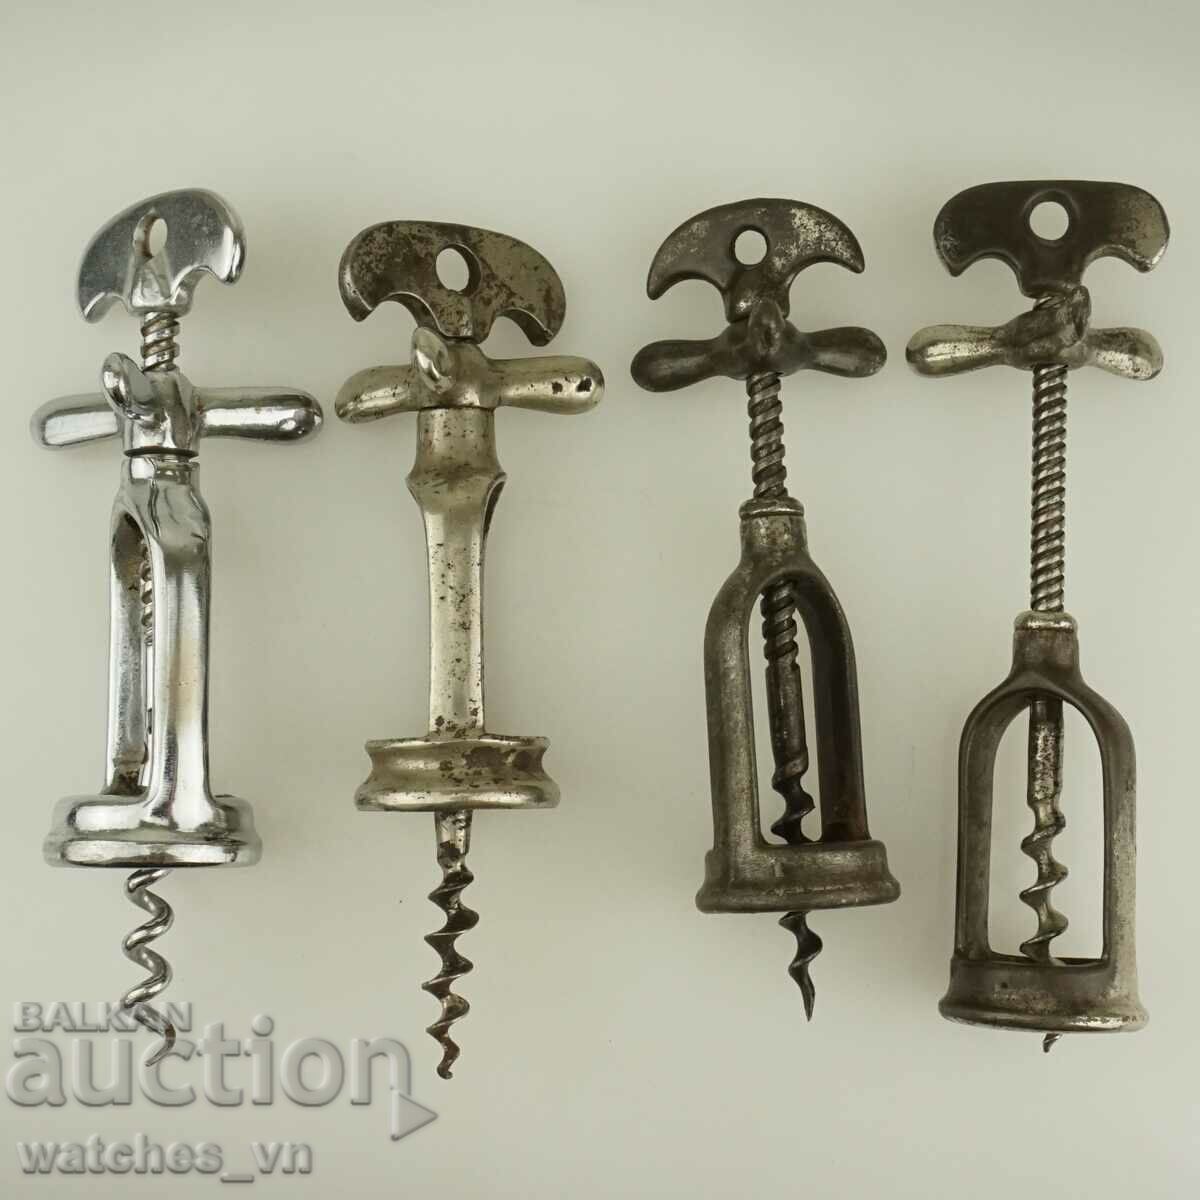 LOT Very Old corkscrews for corks. They work!